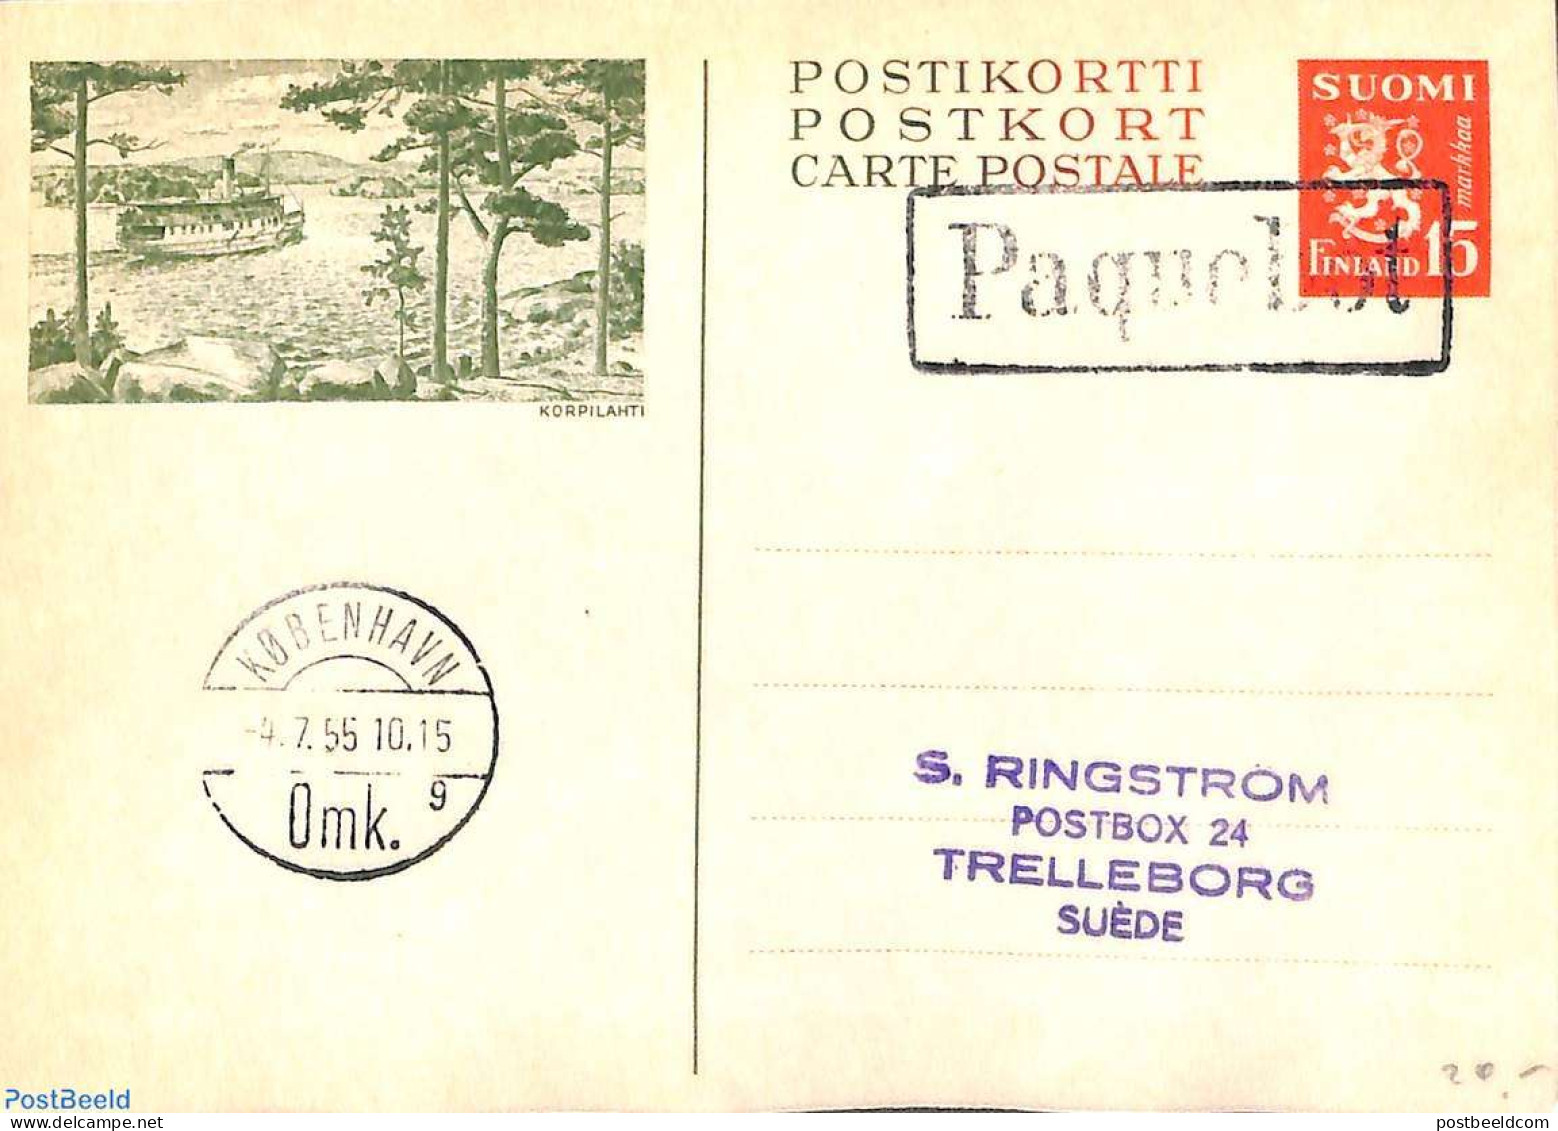 Finland 1955 Illustrated Postcard, PAQUEBOT Postmark, Used Postal Stationary - Covers & Documents